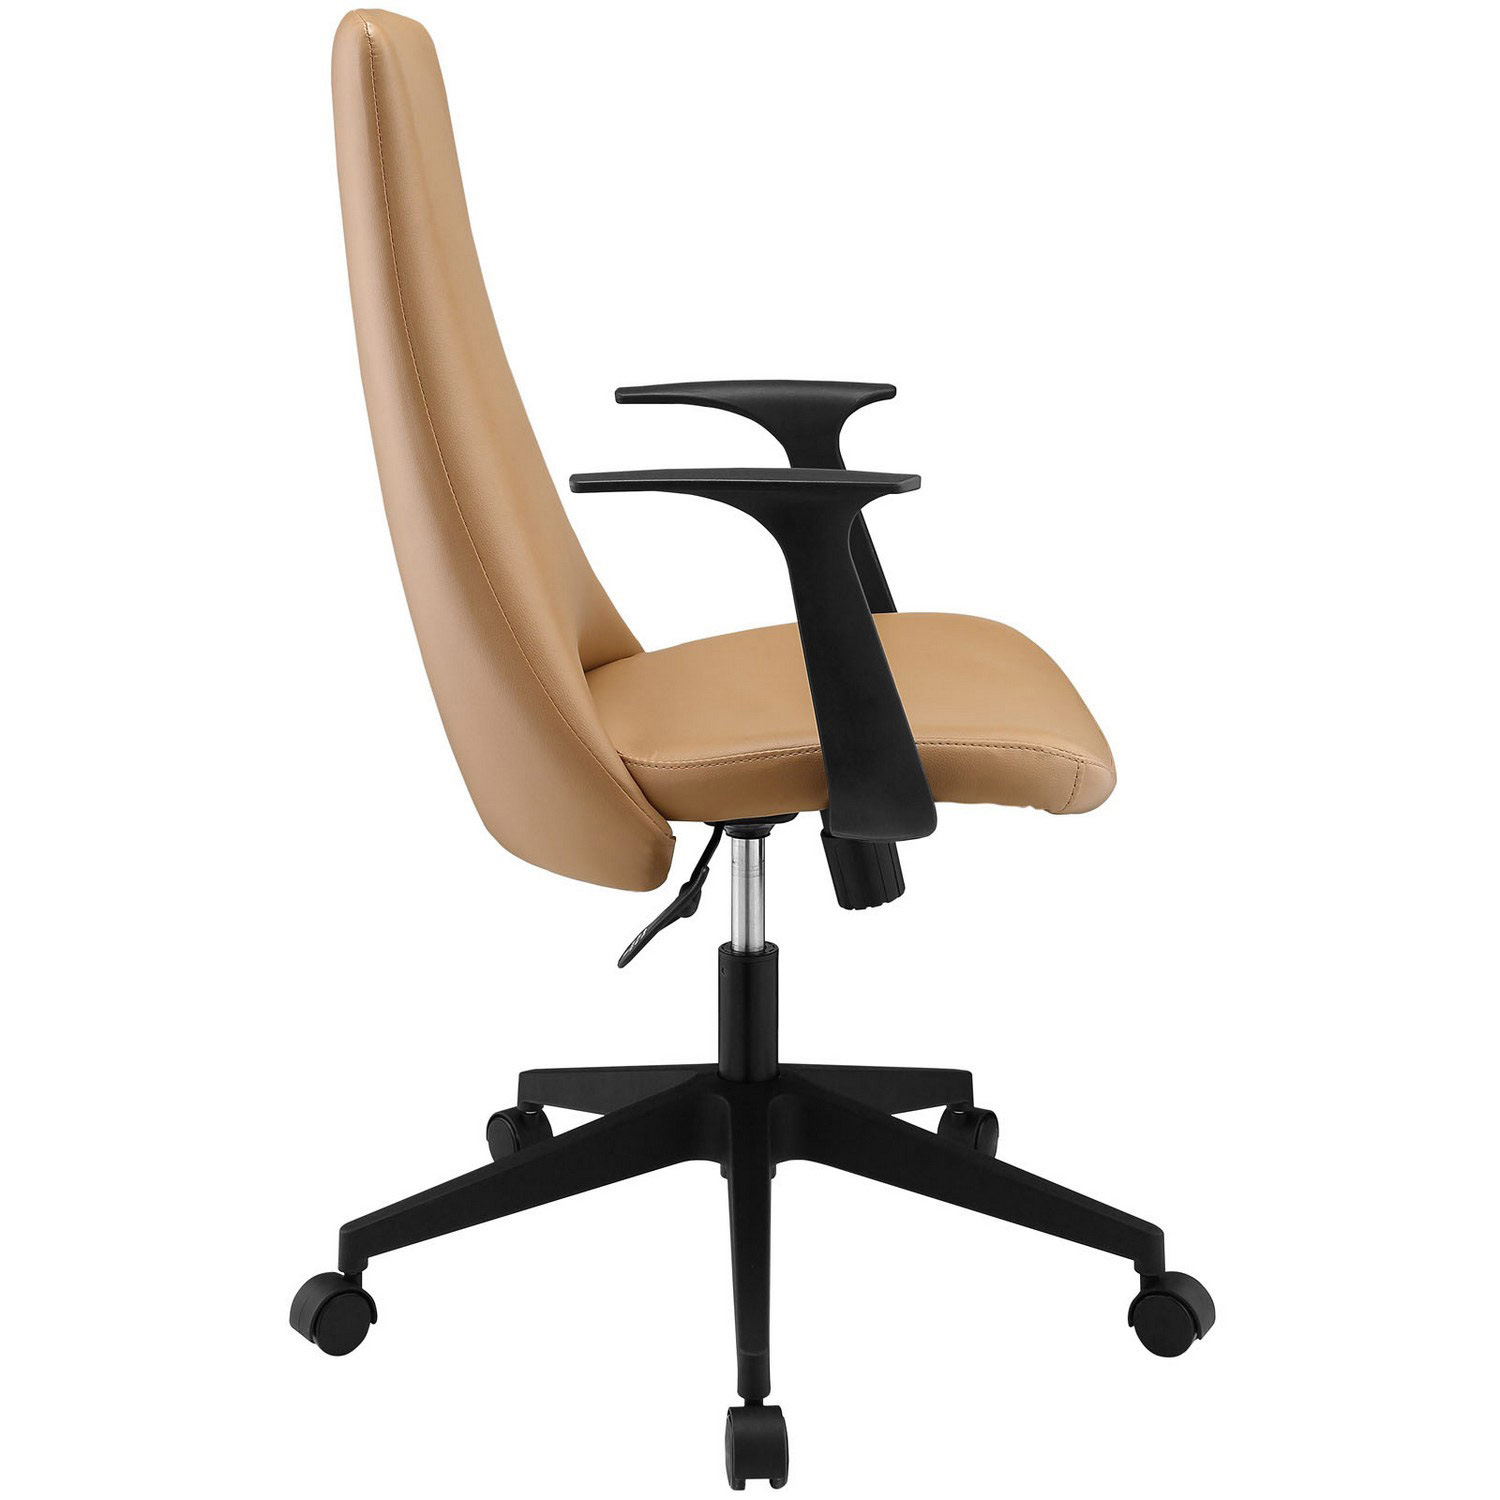 Modway Fount Mid Back Office Chair - Tan